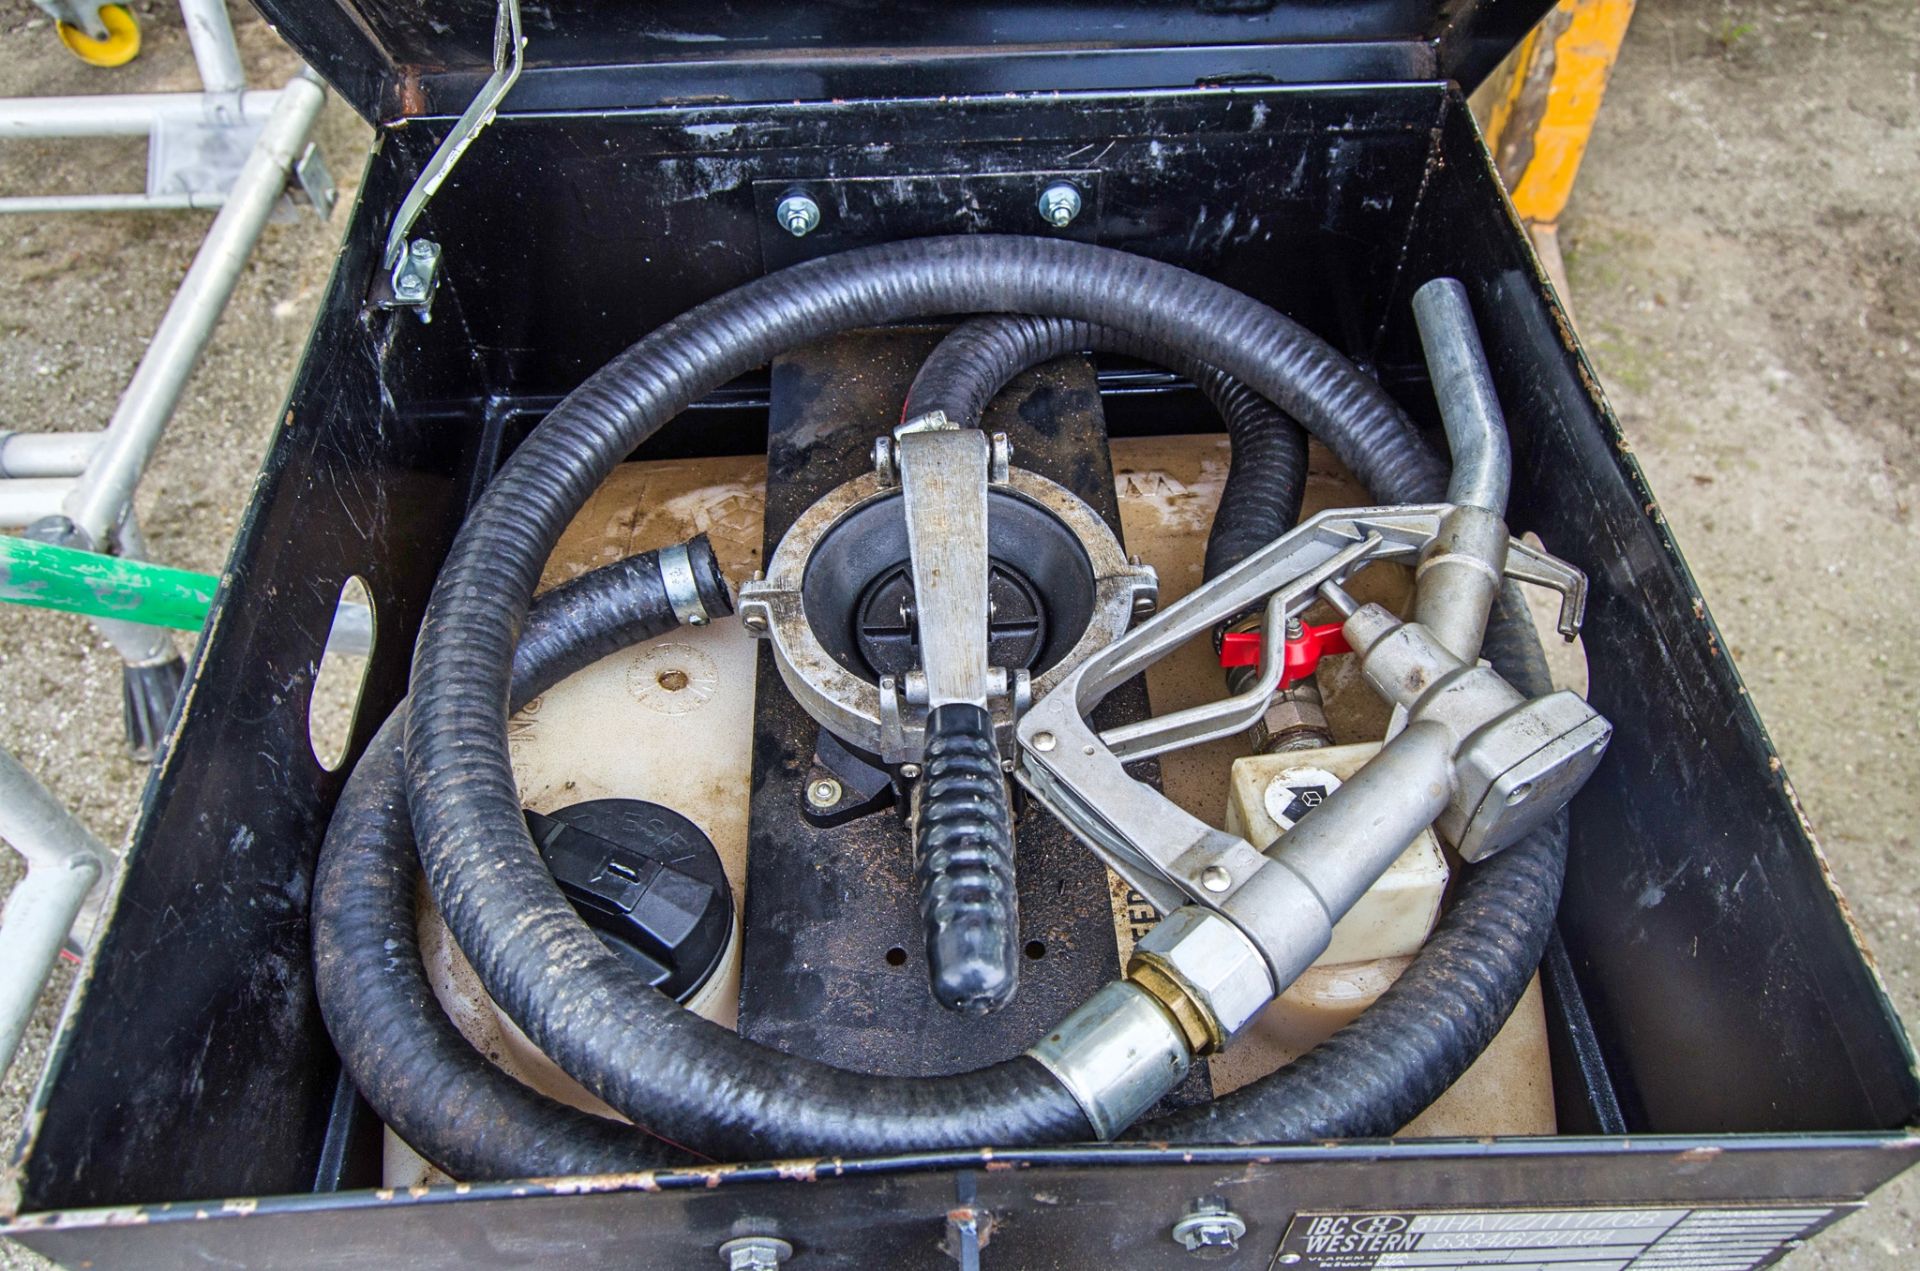 Western Easy Cube 105 litre bunded fuel bowser c/w manual pump, delivery hose and nozzle A845845 - Image 2 of 2